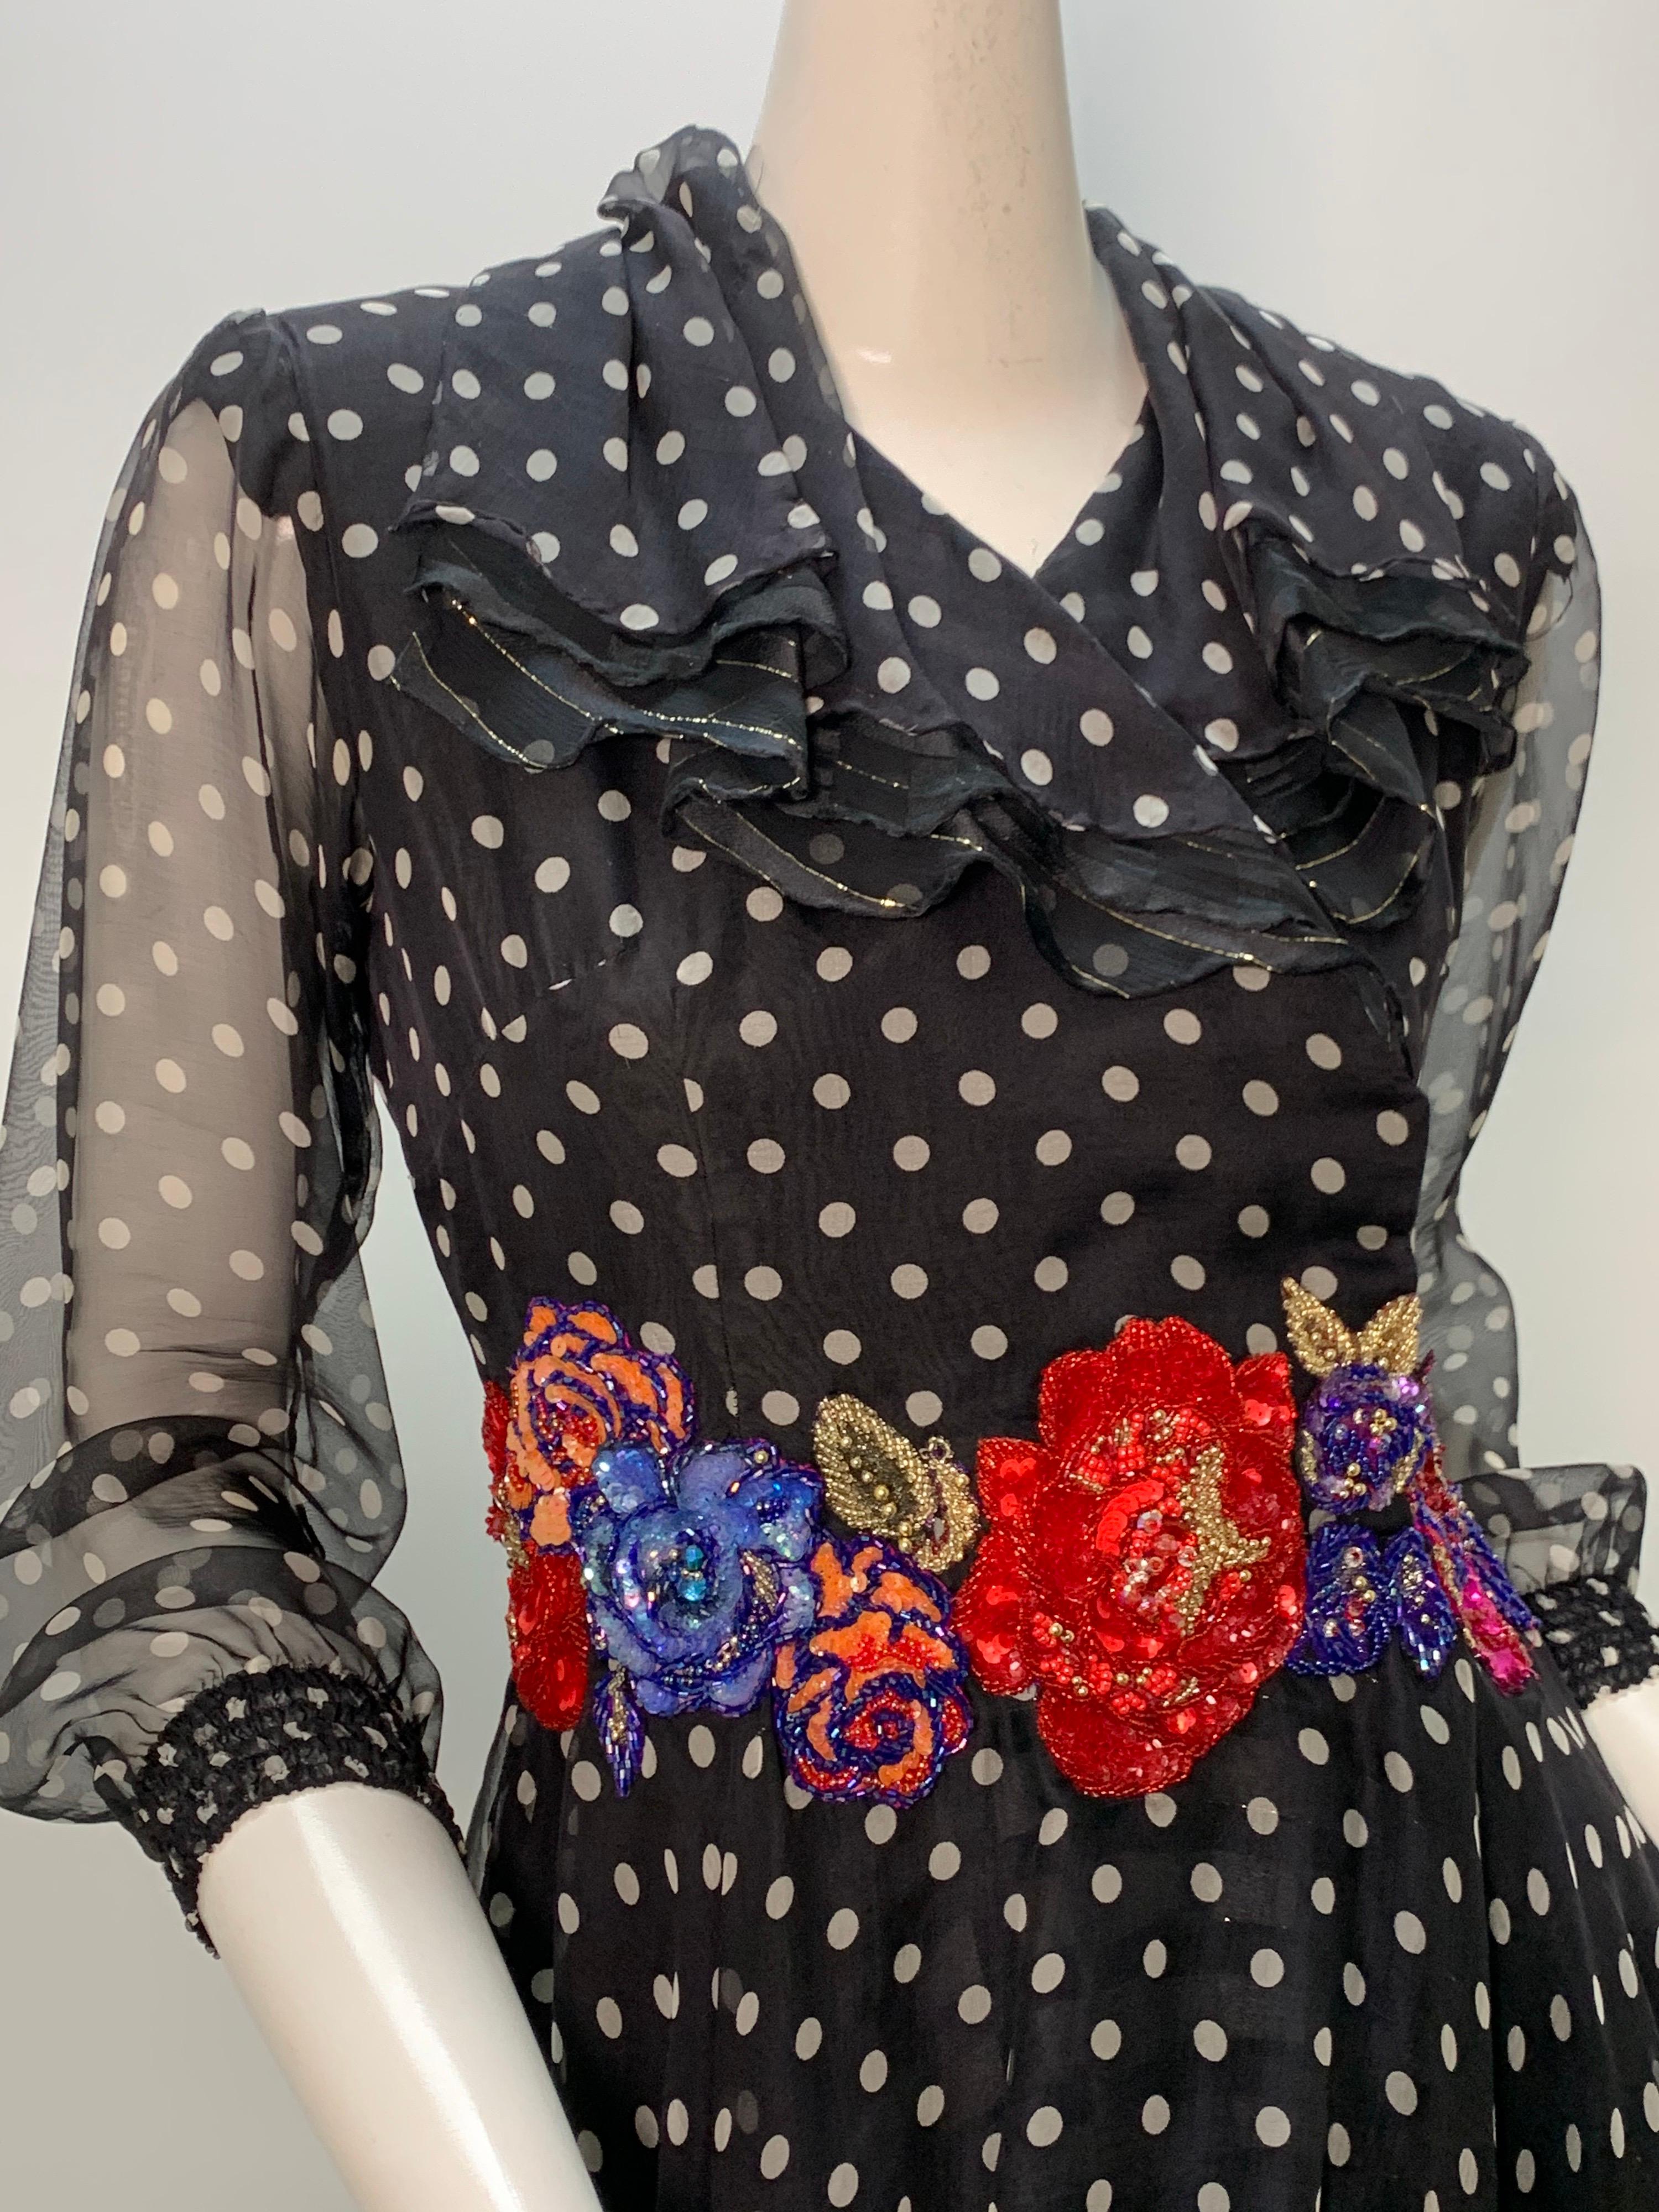 1980 Whimsical Silk Chiffon Polka Dot Dress W/ Colorful Beaded & Sequin Florals  1